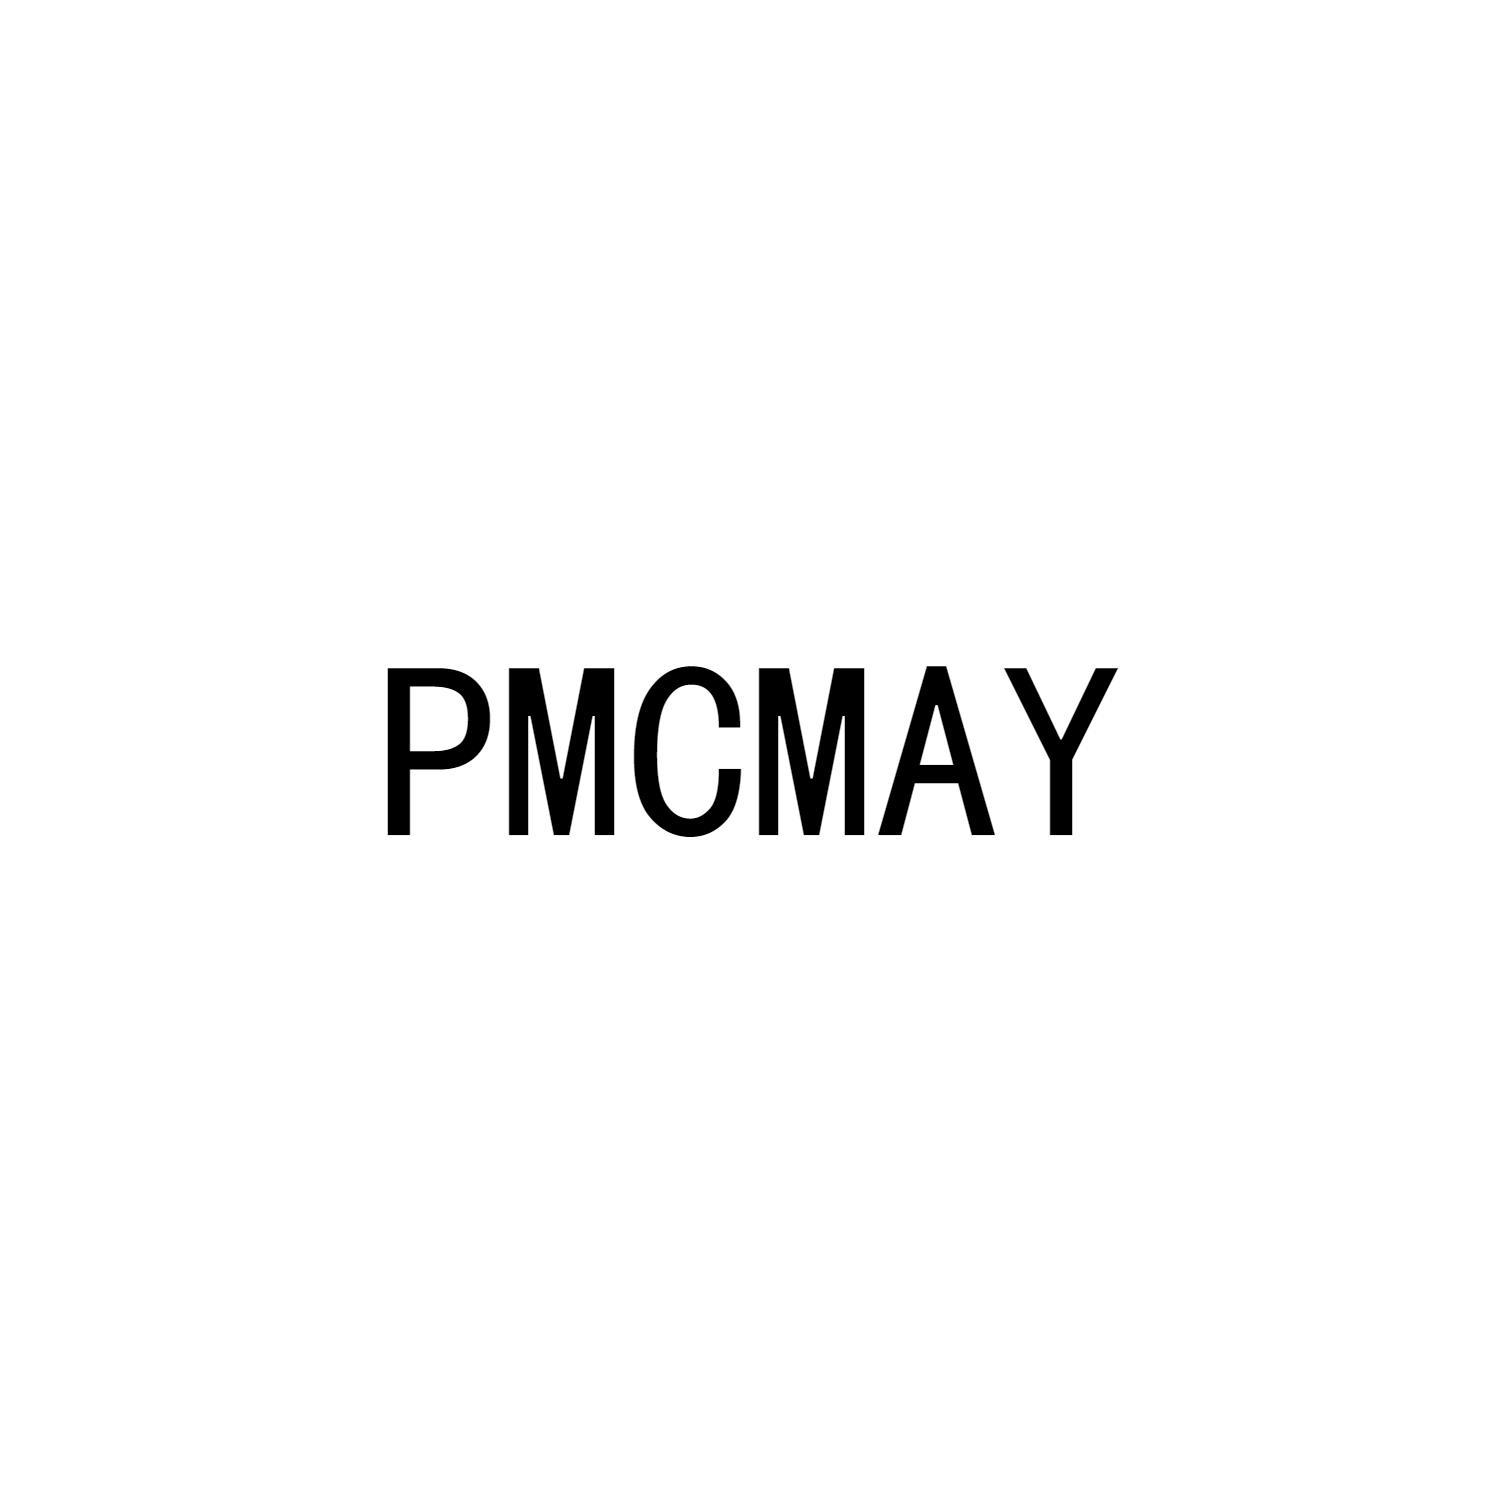 PMCMAY